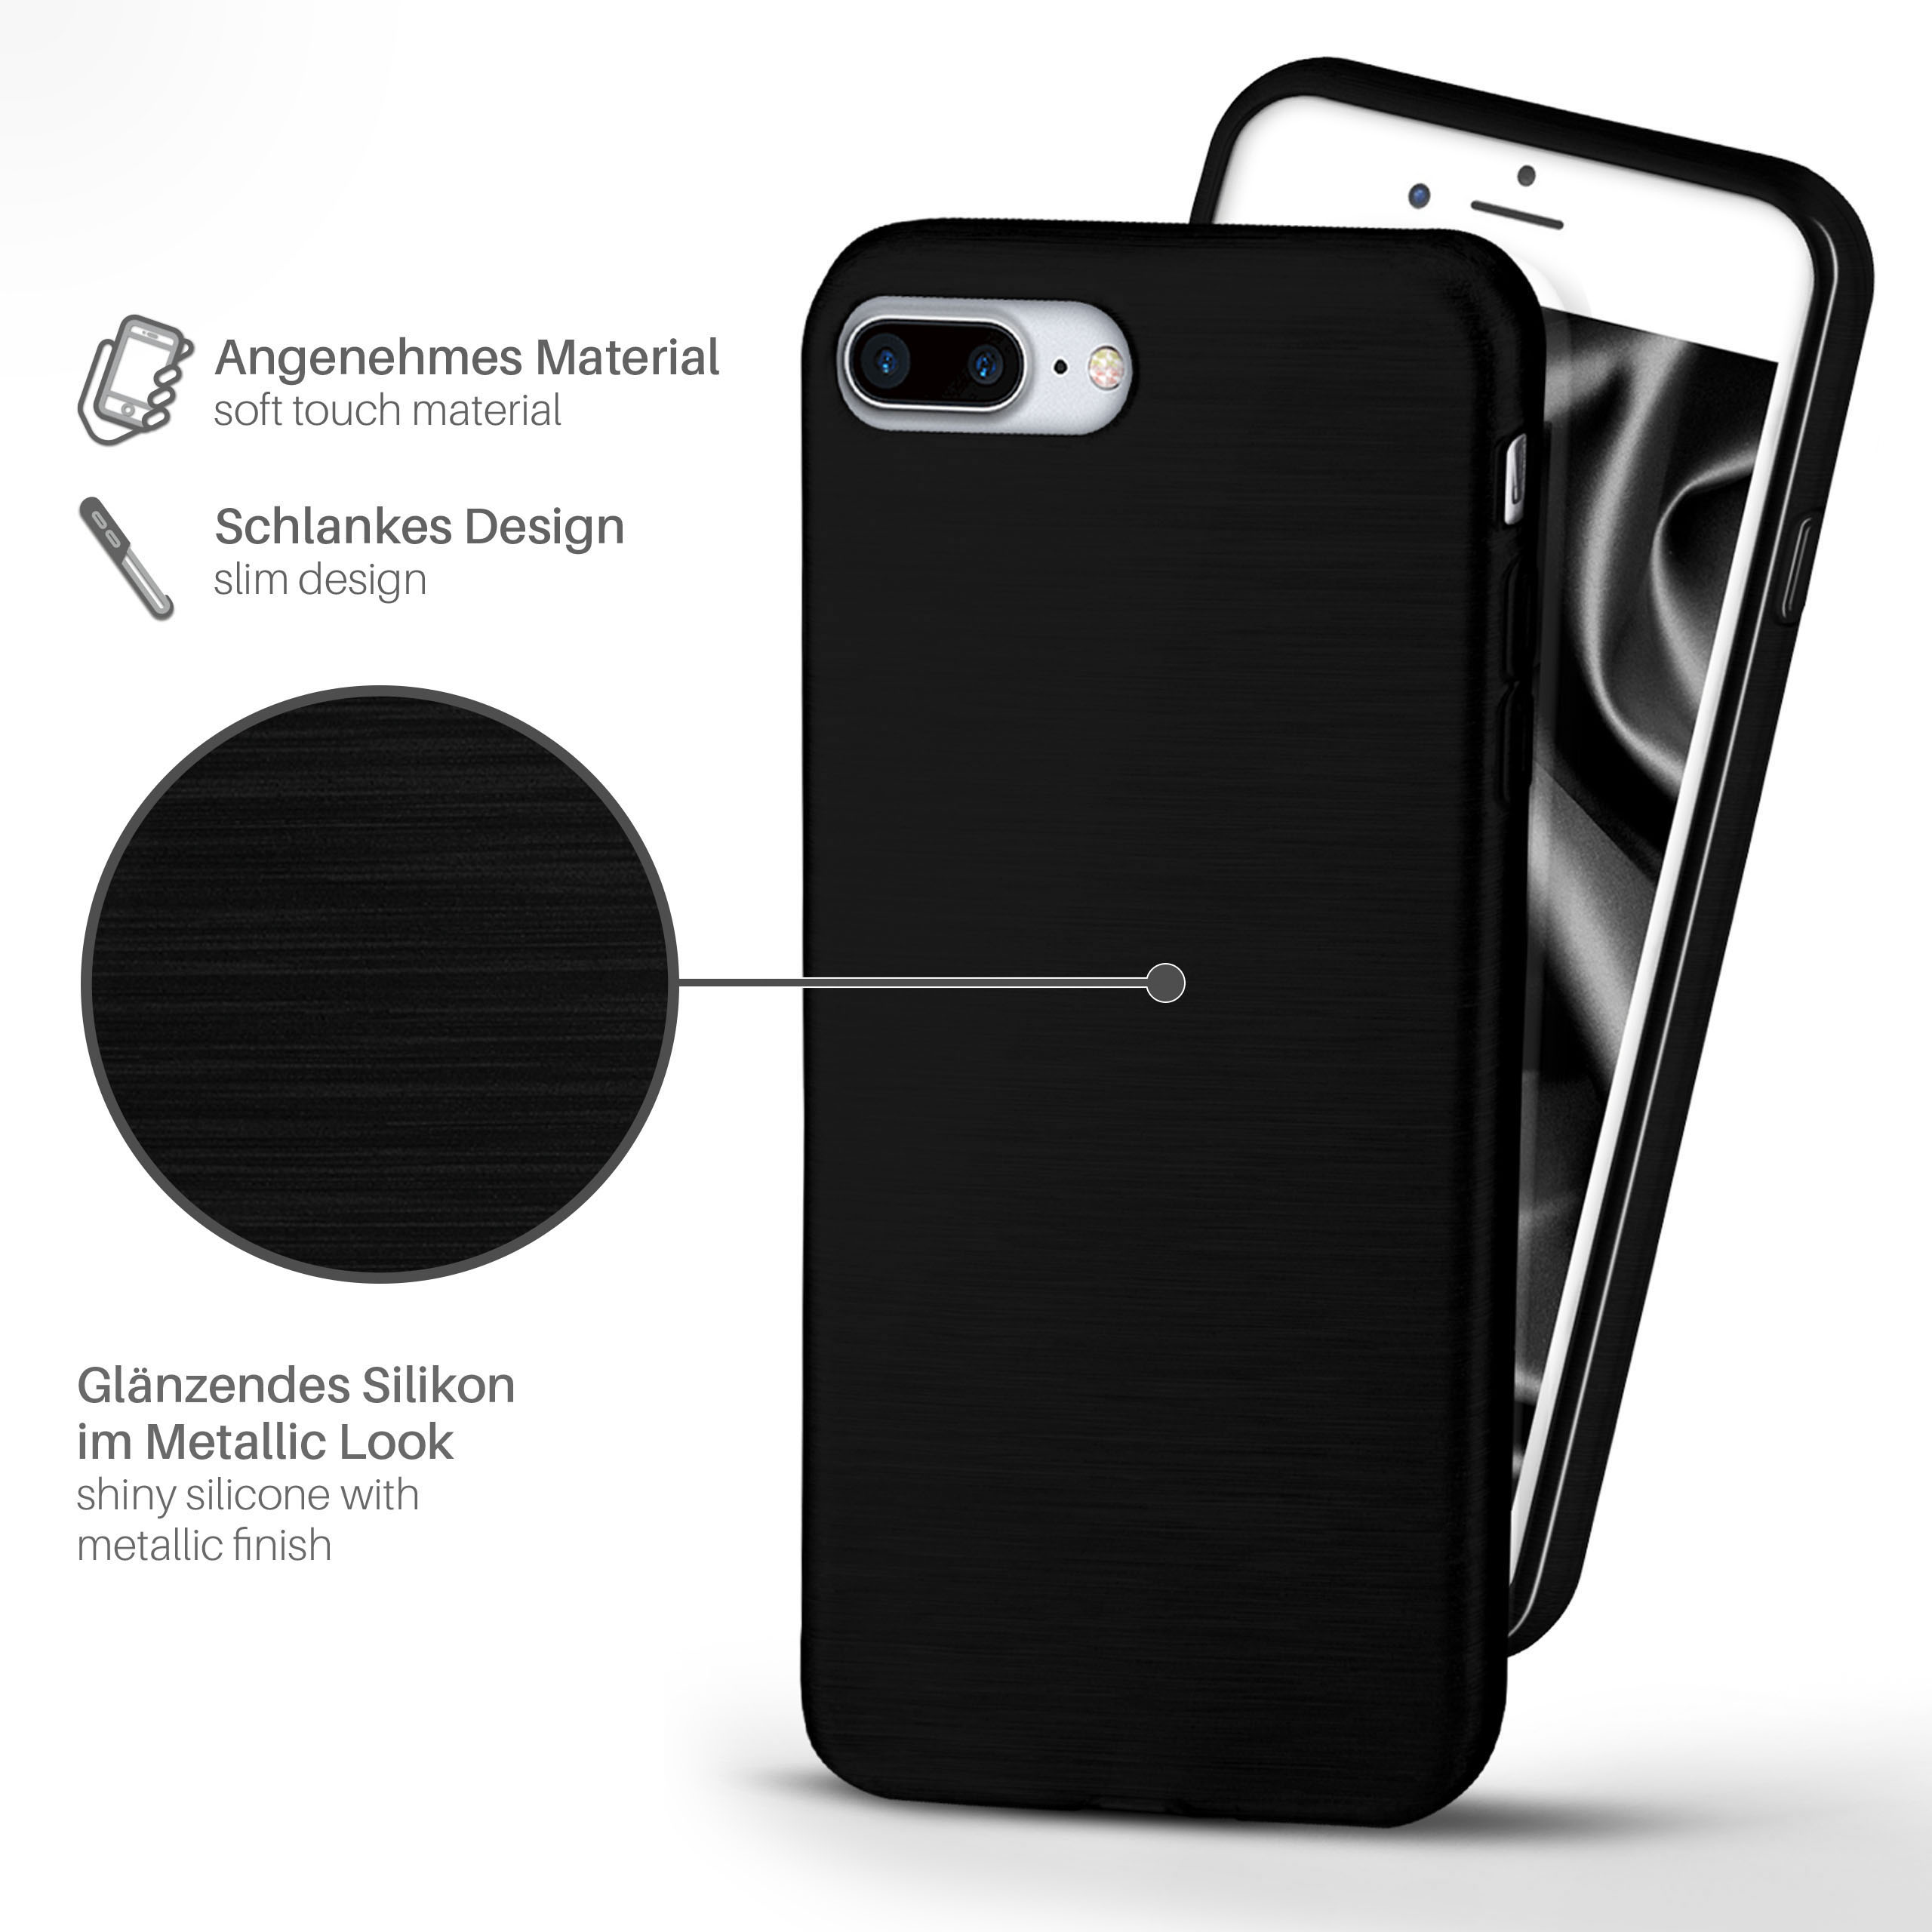 iPhone iPhone Onyx-Black Brushed Backcover, MOEX Plus 8 7 Apple, Plus, / Case,